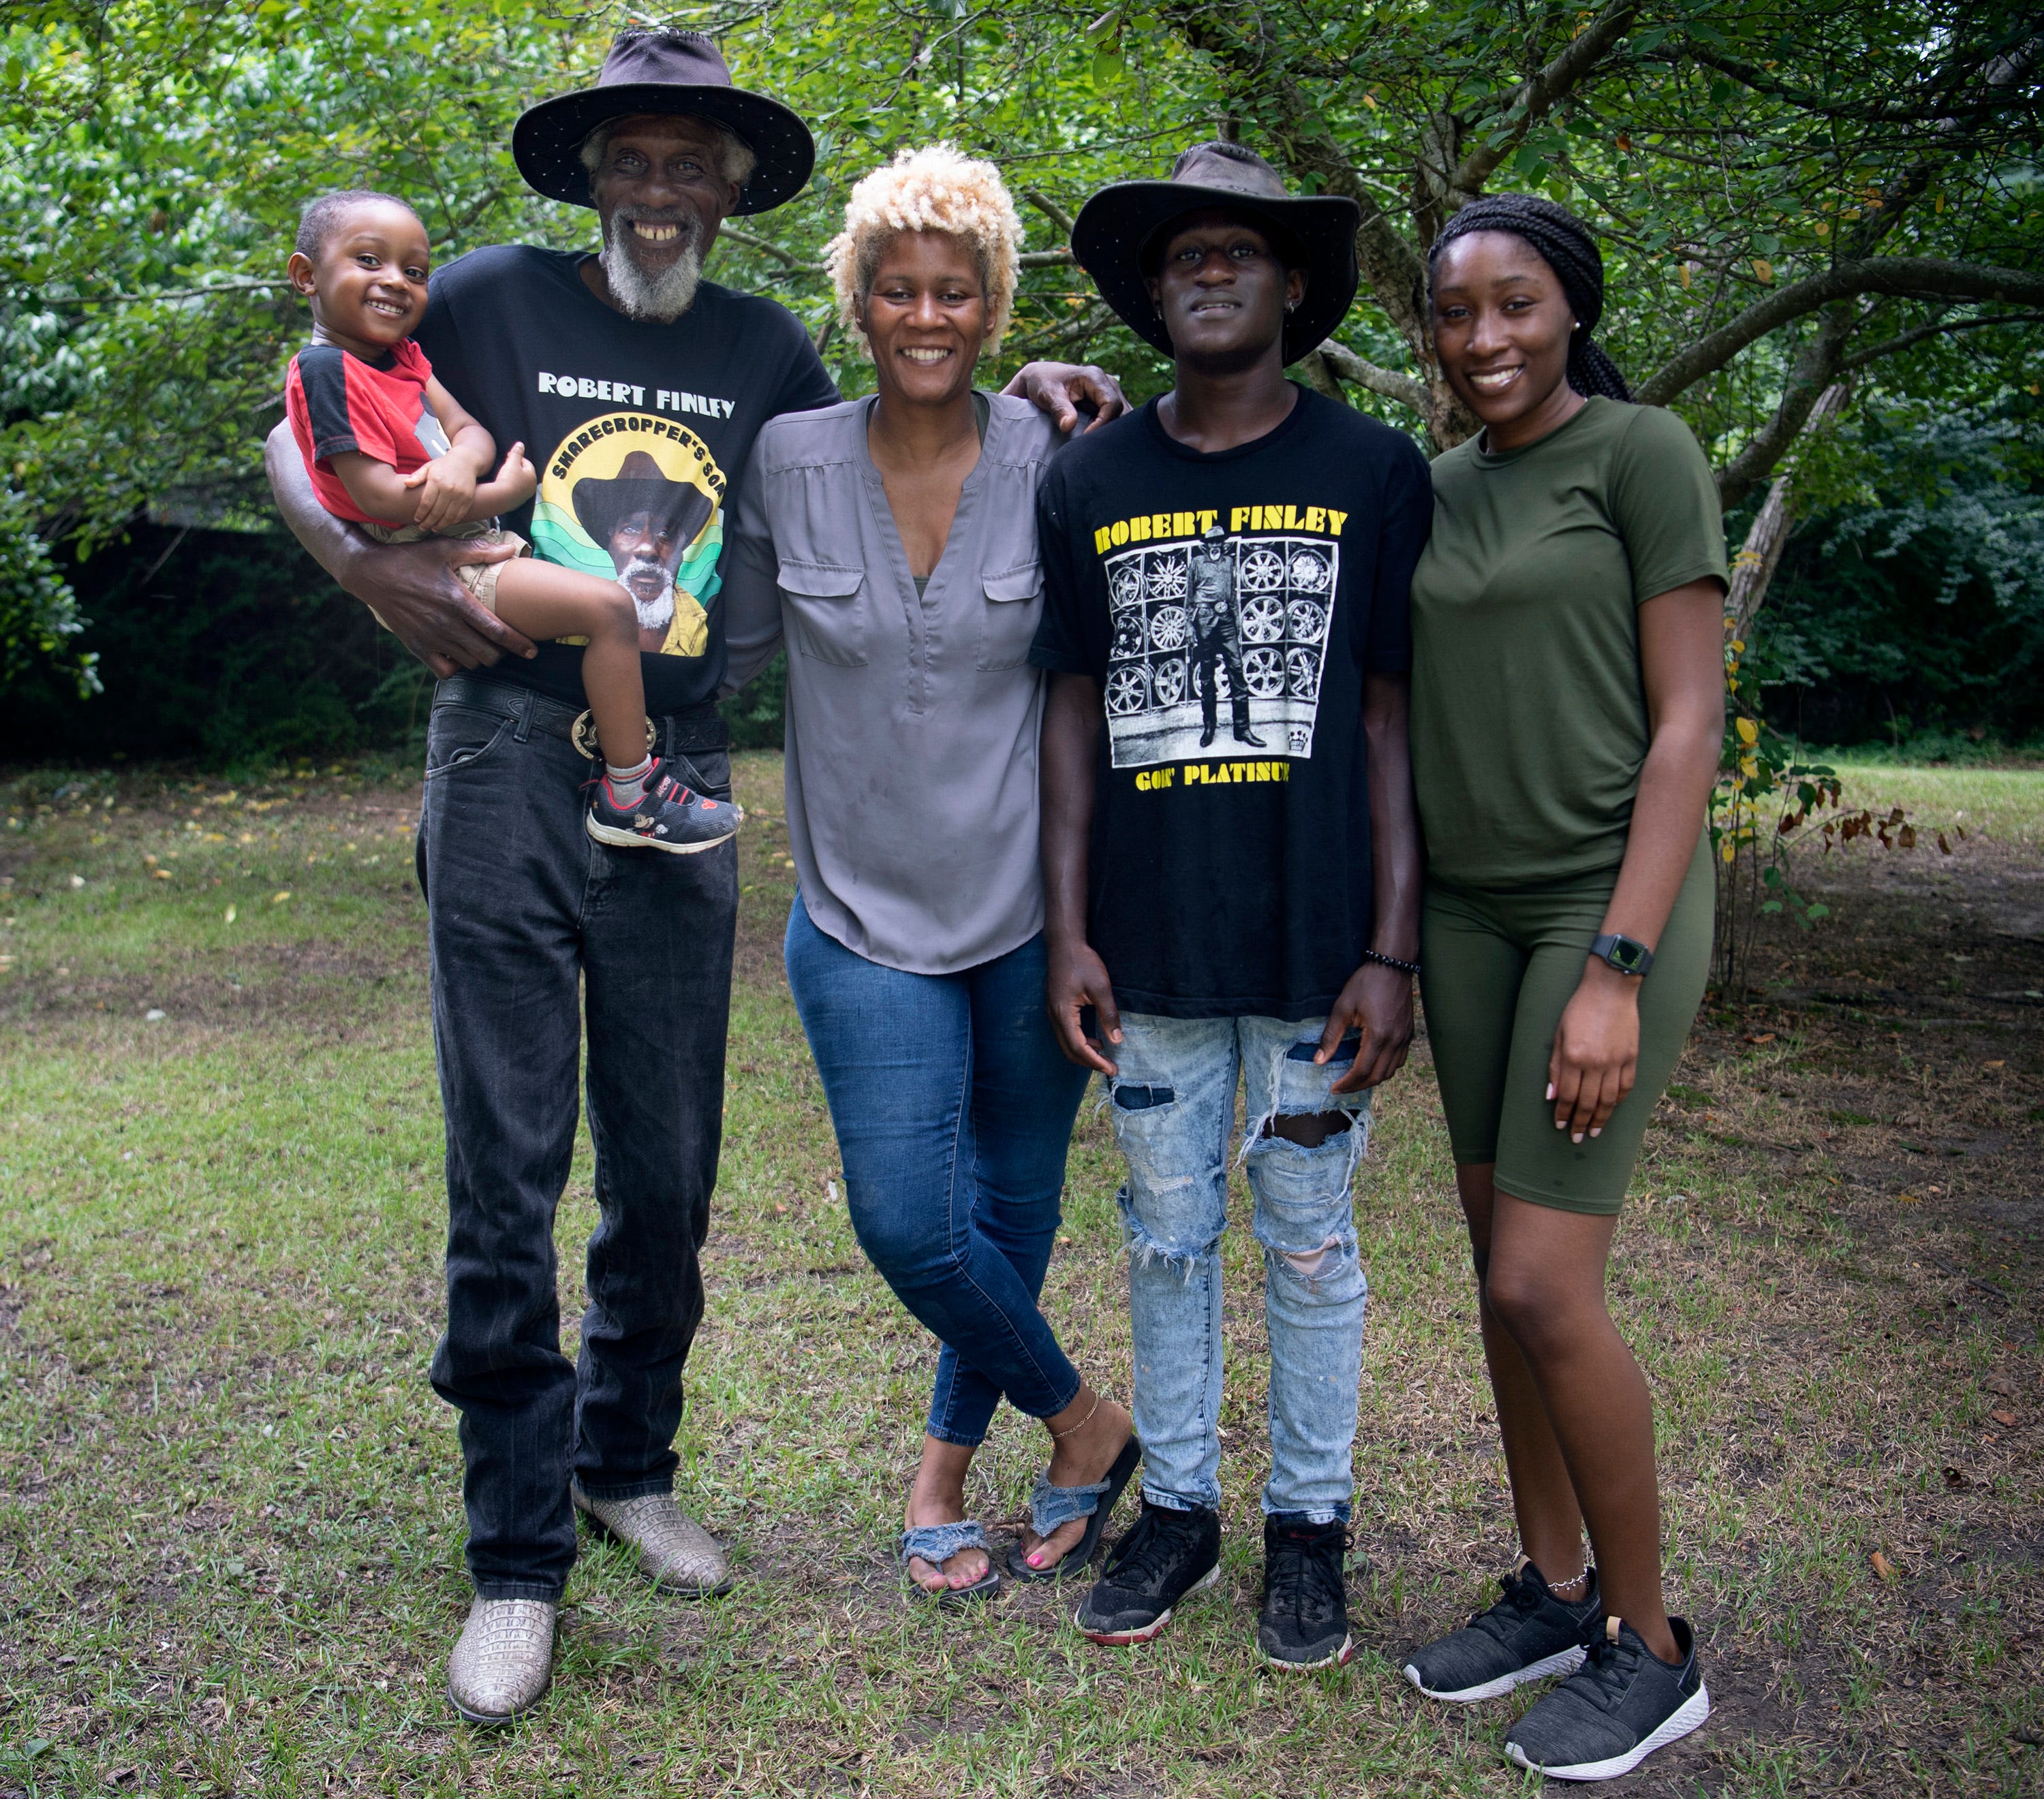 Robert Finley is close to the rest of his family in Bernice, Louisiana. Here he is with, from left. great-grandson Elijah McMahon, daughter Christy Johnson, and grandchildren Andre and LaQuindrelyn McMahon. Photographed Friday, July 16, 2021 in Bernice, La.